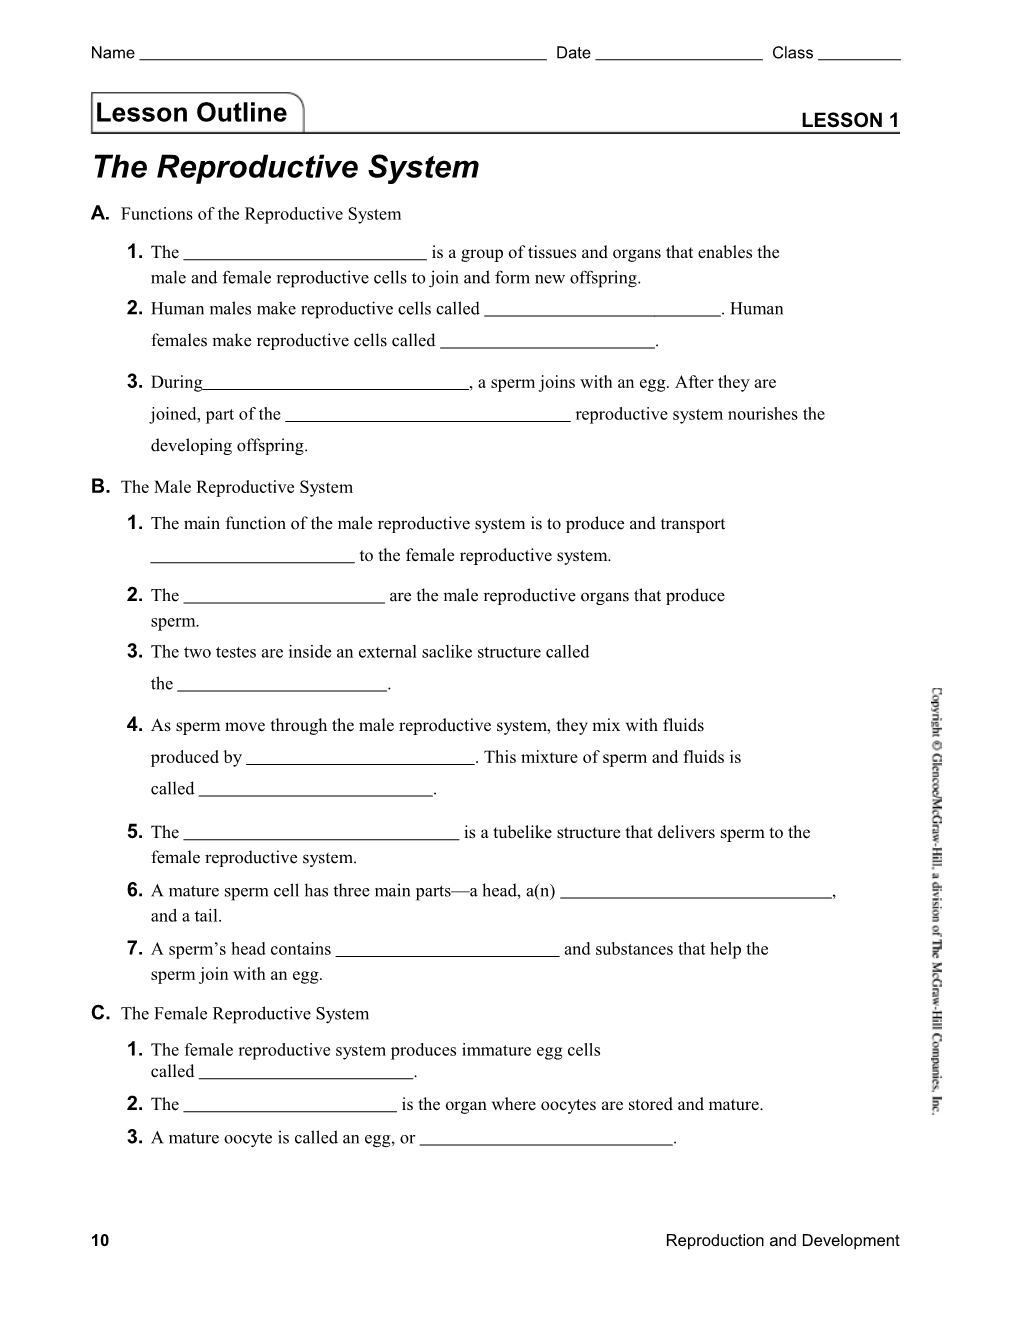 Lesson 1 the Reproductive System